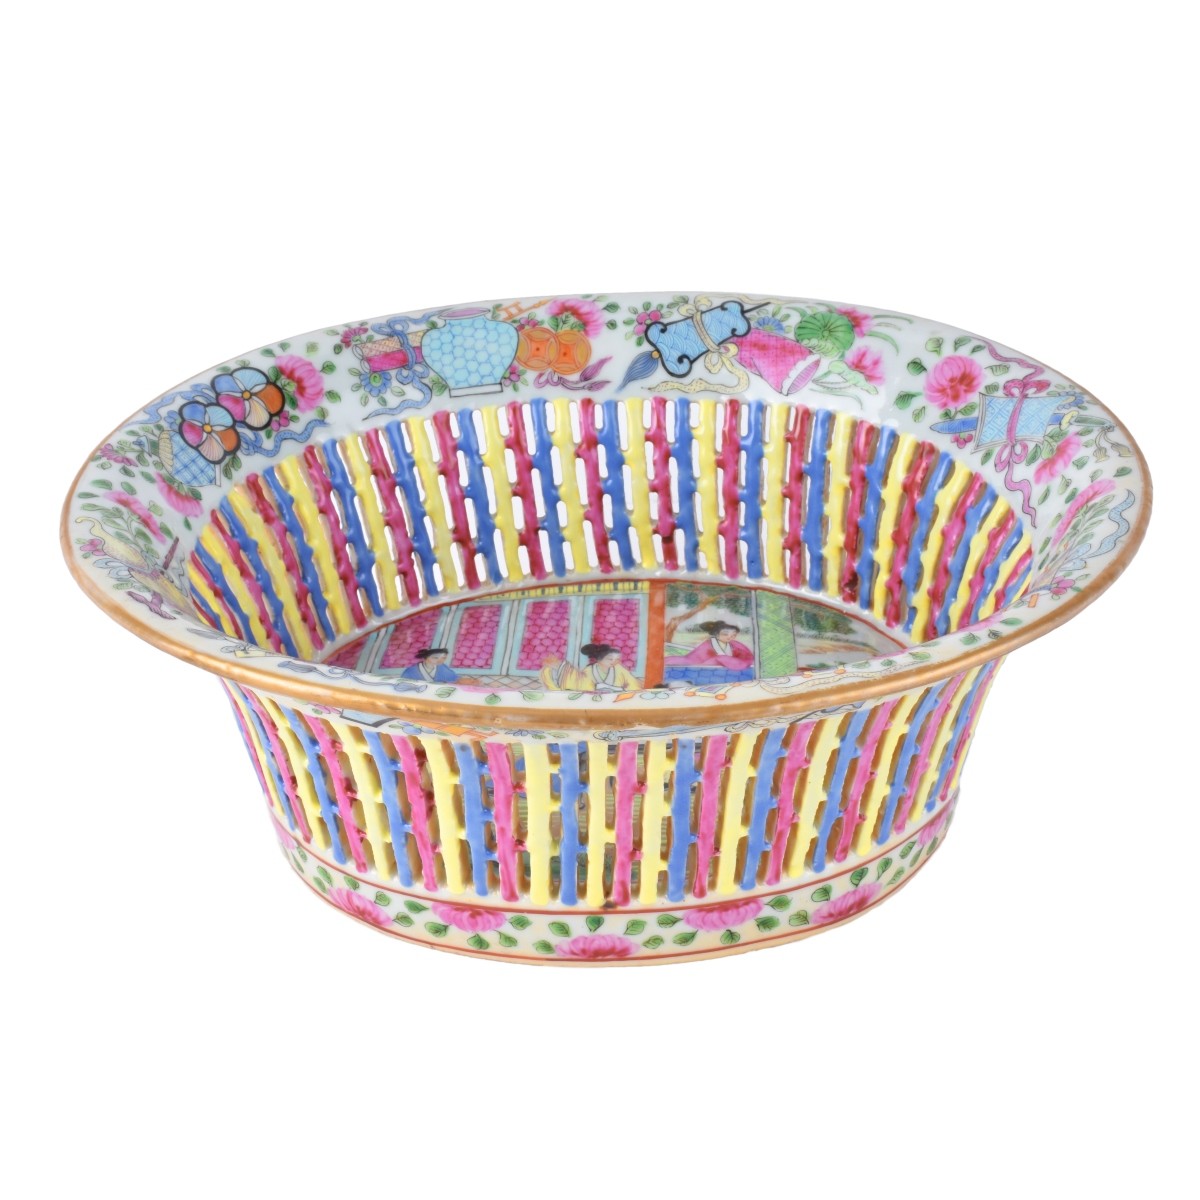 Rose Medallion Reticulated Bowl